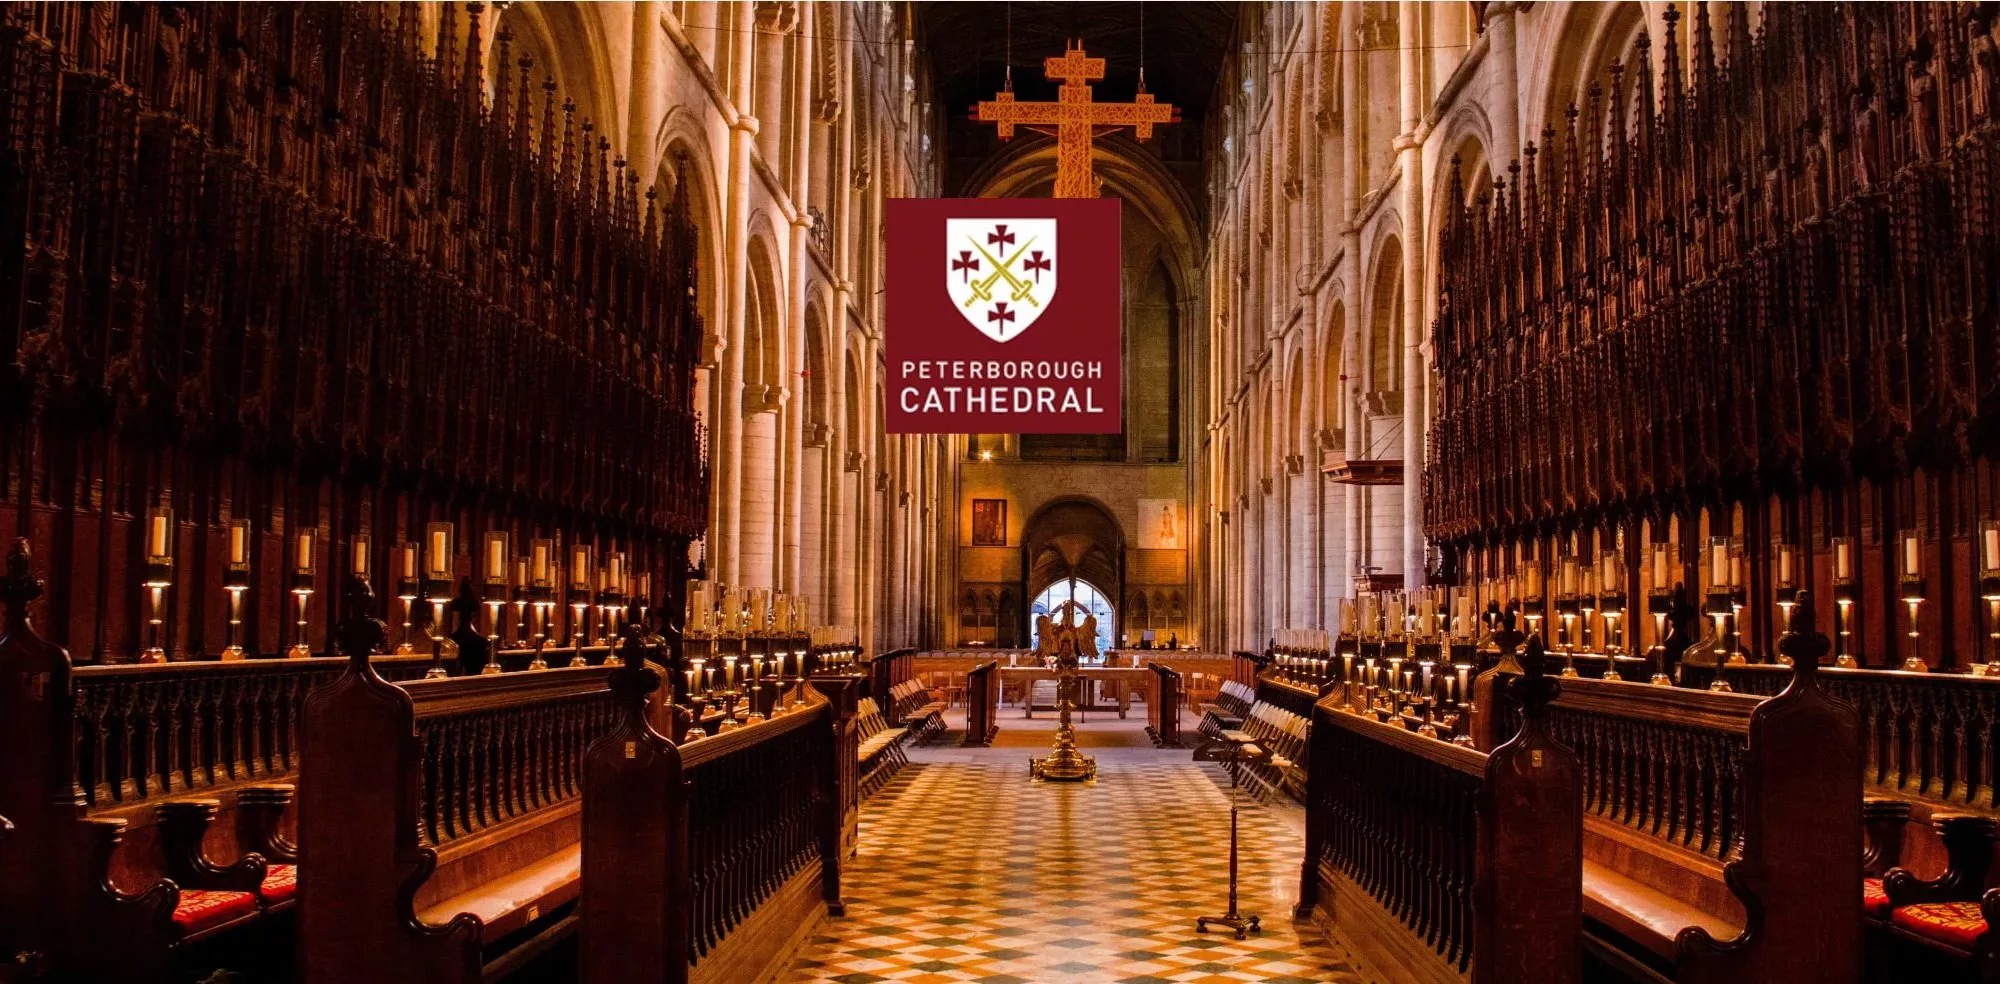 Charities - The Peterborough Cathedral Logo Displayed Over An Image Of The Cathedrals Interior